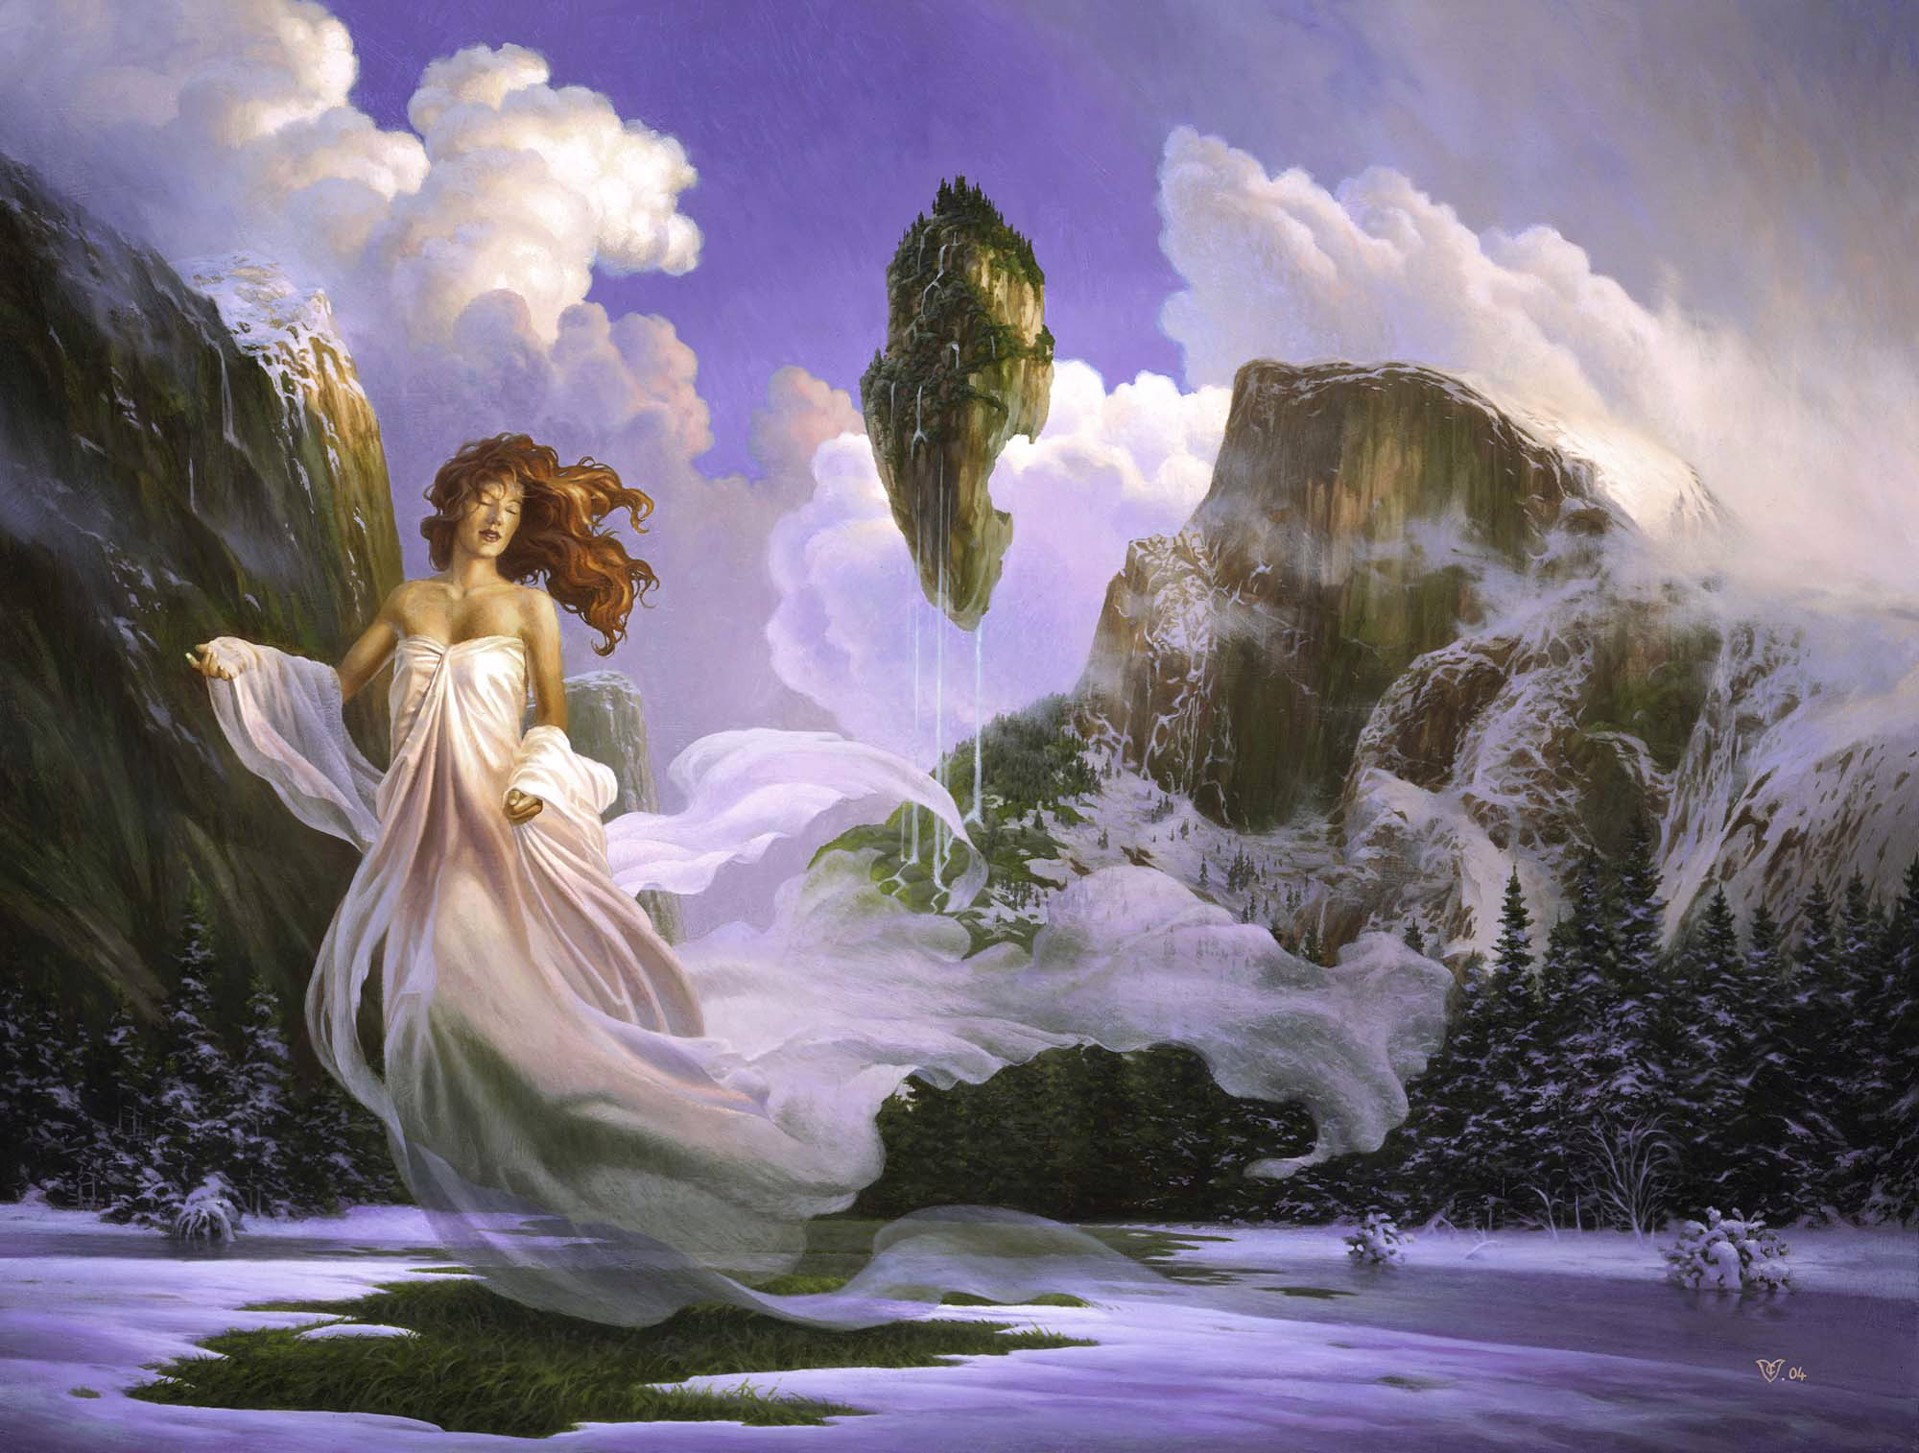 Untouched Gardens by Christophe Vacher